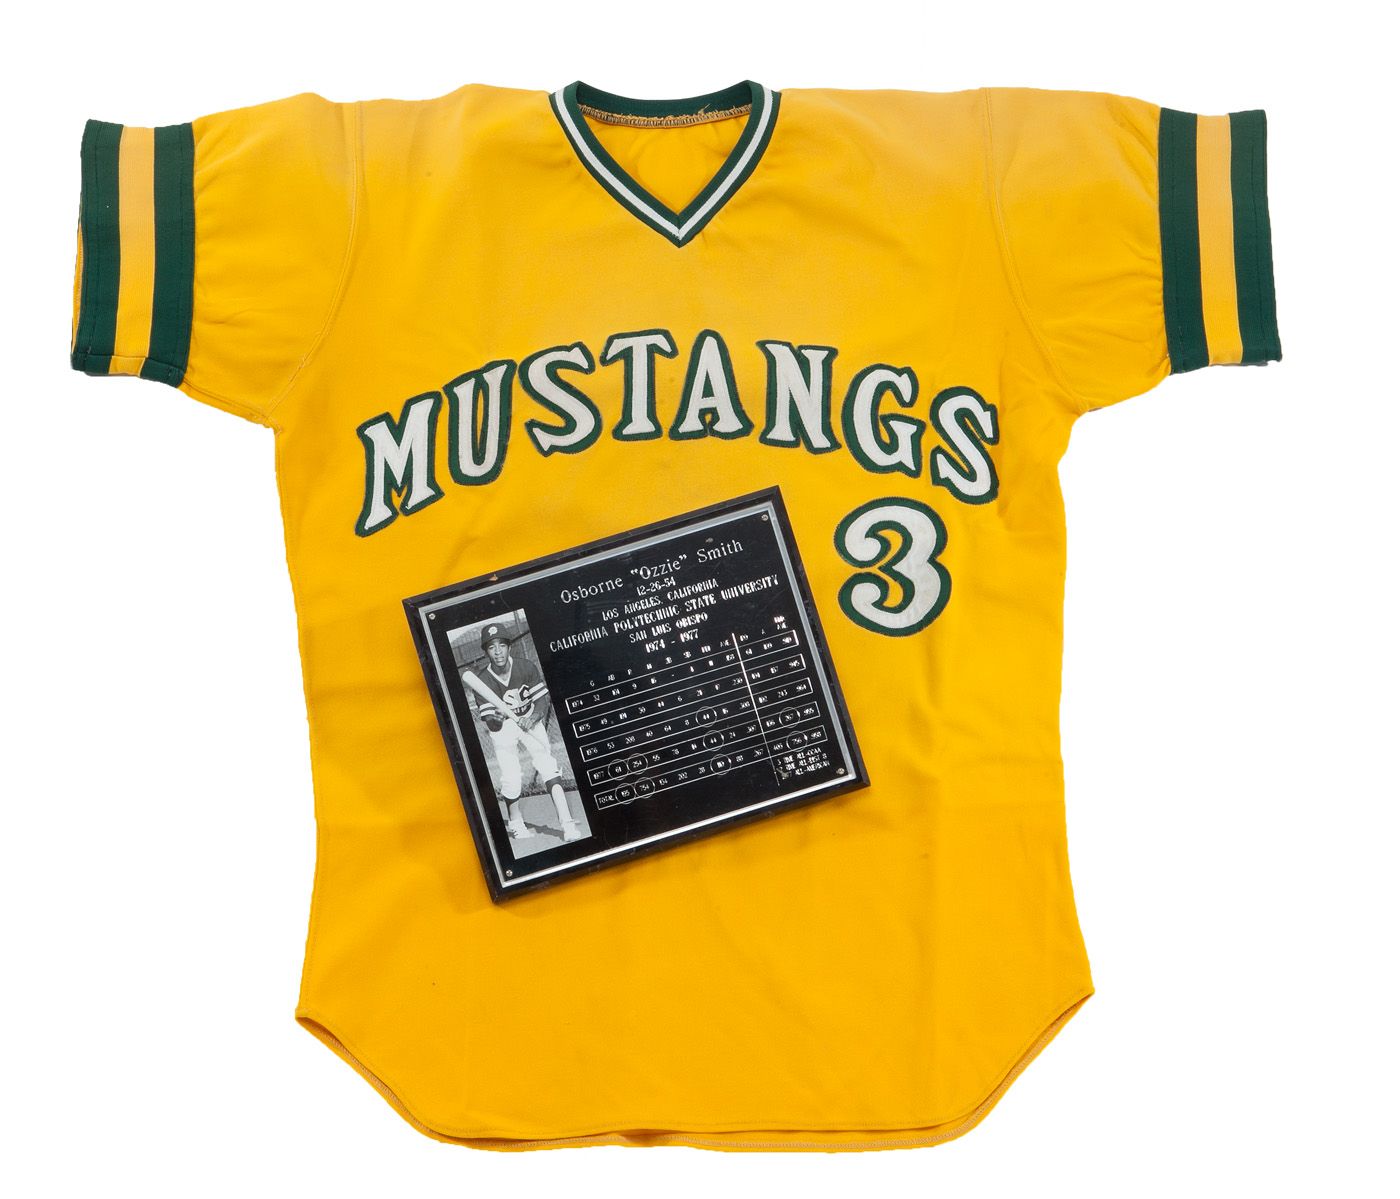 Lot Detail - OZZIE SMITH'S CA. 1975 CAL POLY SAN LUIS OBISPO UNIVERSITY  BASEBALL GAME WORN JERSEY AND RELATED PLAQUE